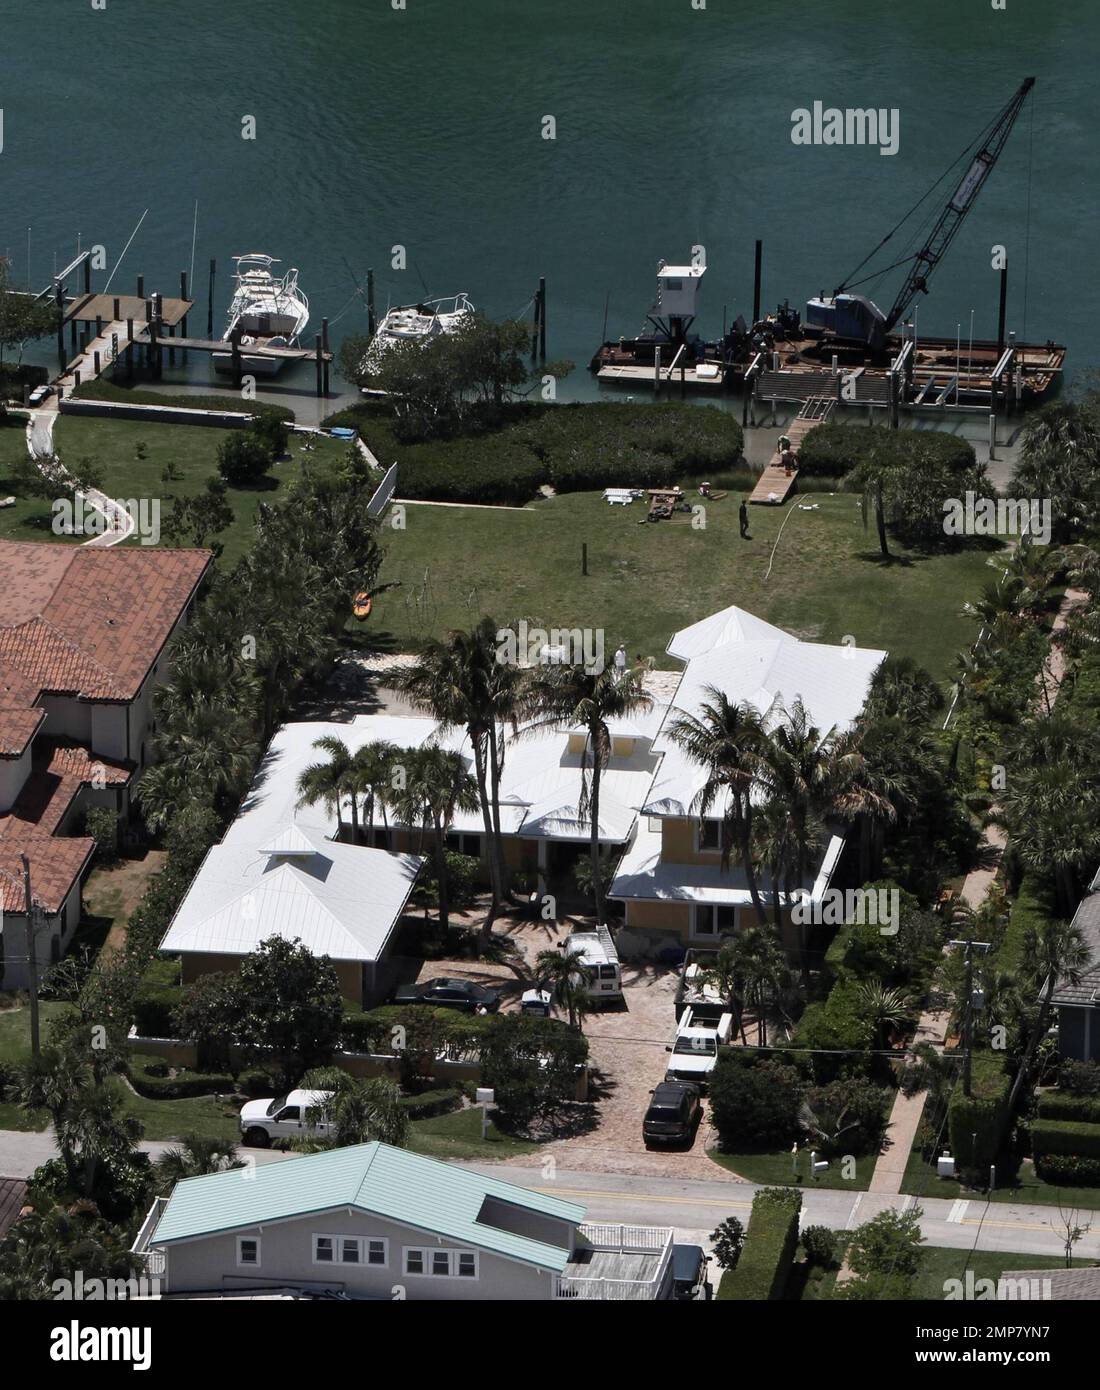 EXCLUSIVE!! Aerial views of actress Olivia Newton-John's $4.1 million, 7000-square-foot home that is currently under renovation.  The Jupiter Inlet Colony, Palm Beach waterfront home was bought by the "Grease" star and her husband John Easterling in June 2009 one year after the couple wed.  The two-story house that has been described as having a Key West feel, has a wide floor plan, four bedrooms and is pet friendly.  Jupiter, FL. 04/27/10.  B Stock Photo